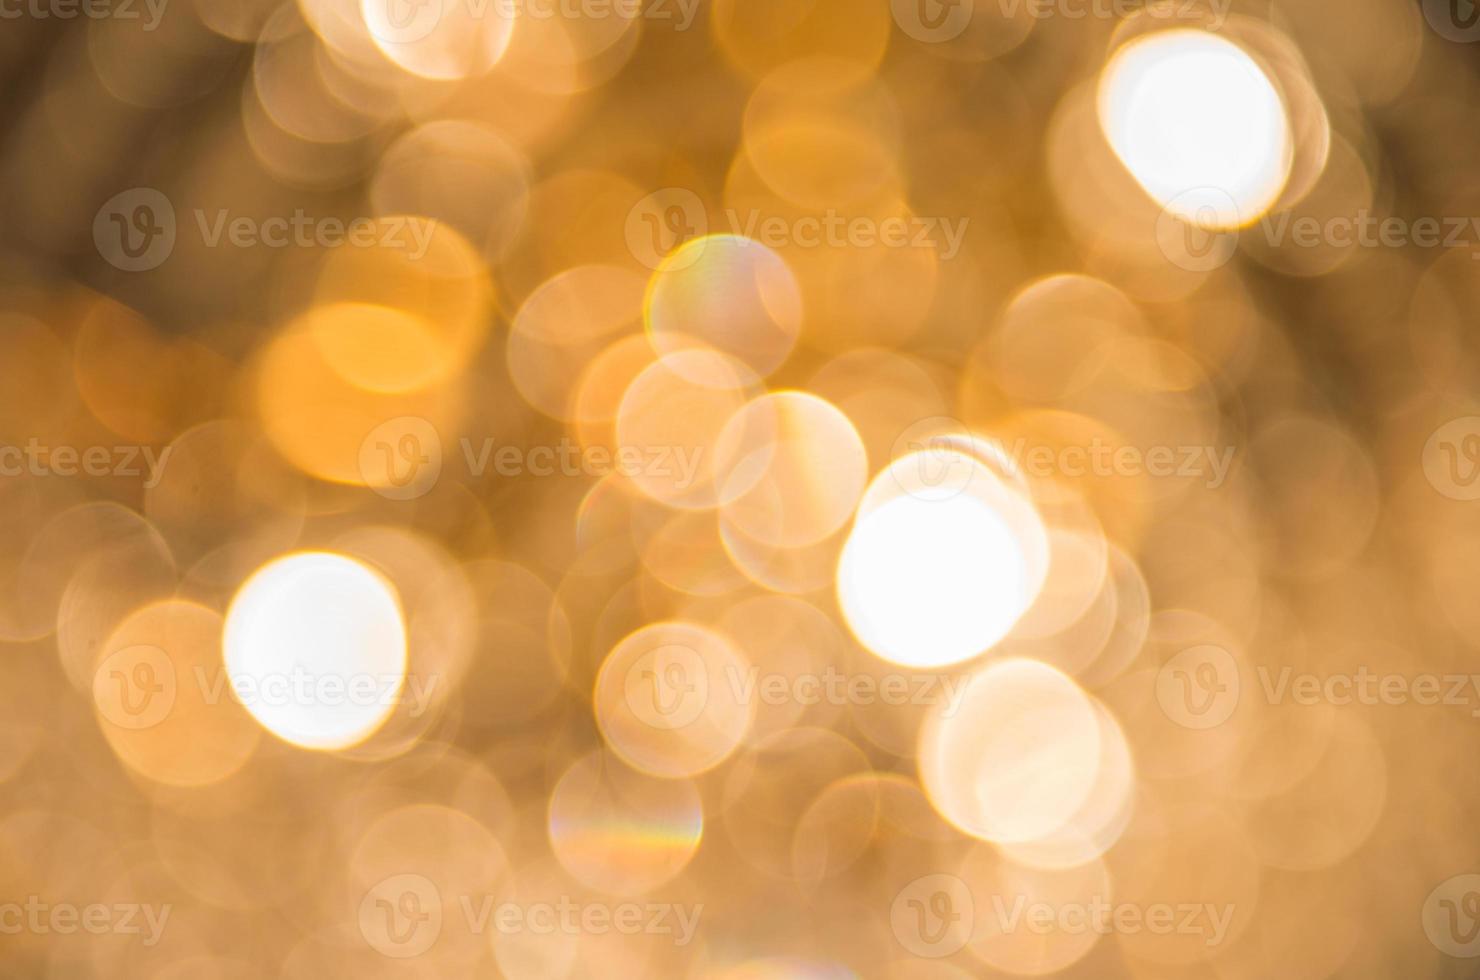 Abstract golden background photo